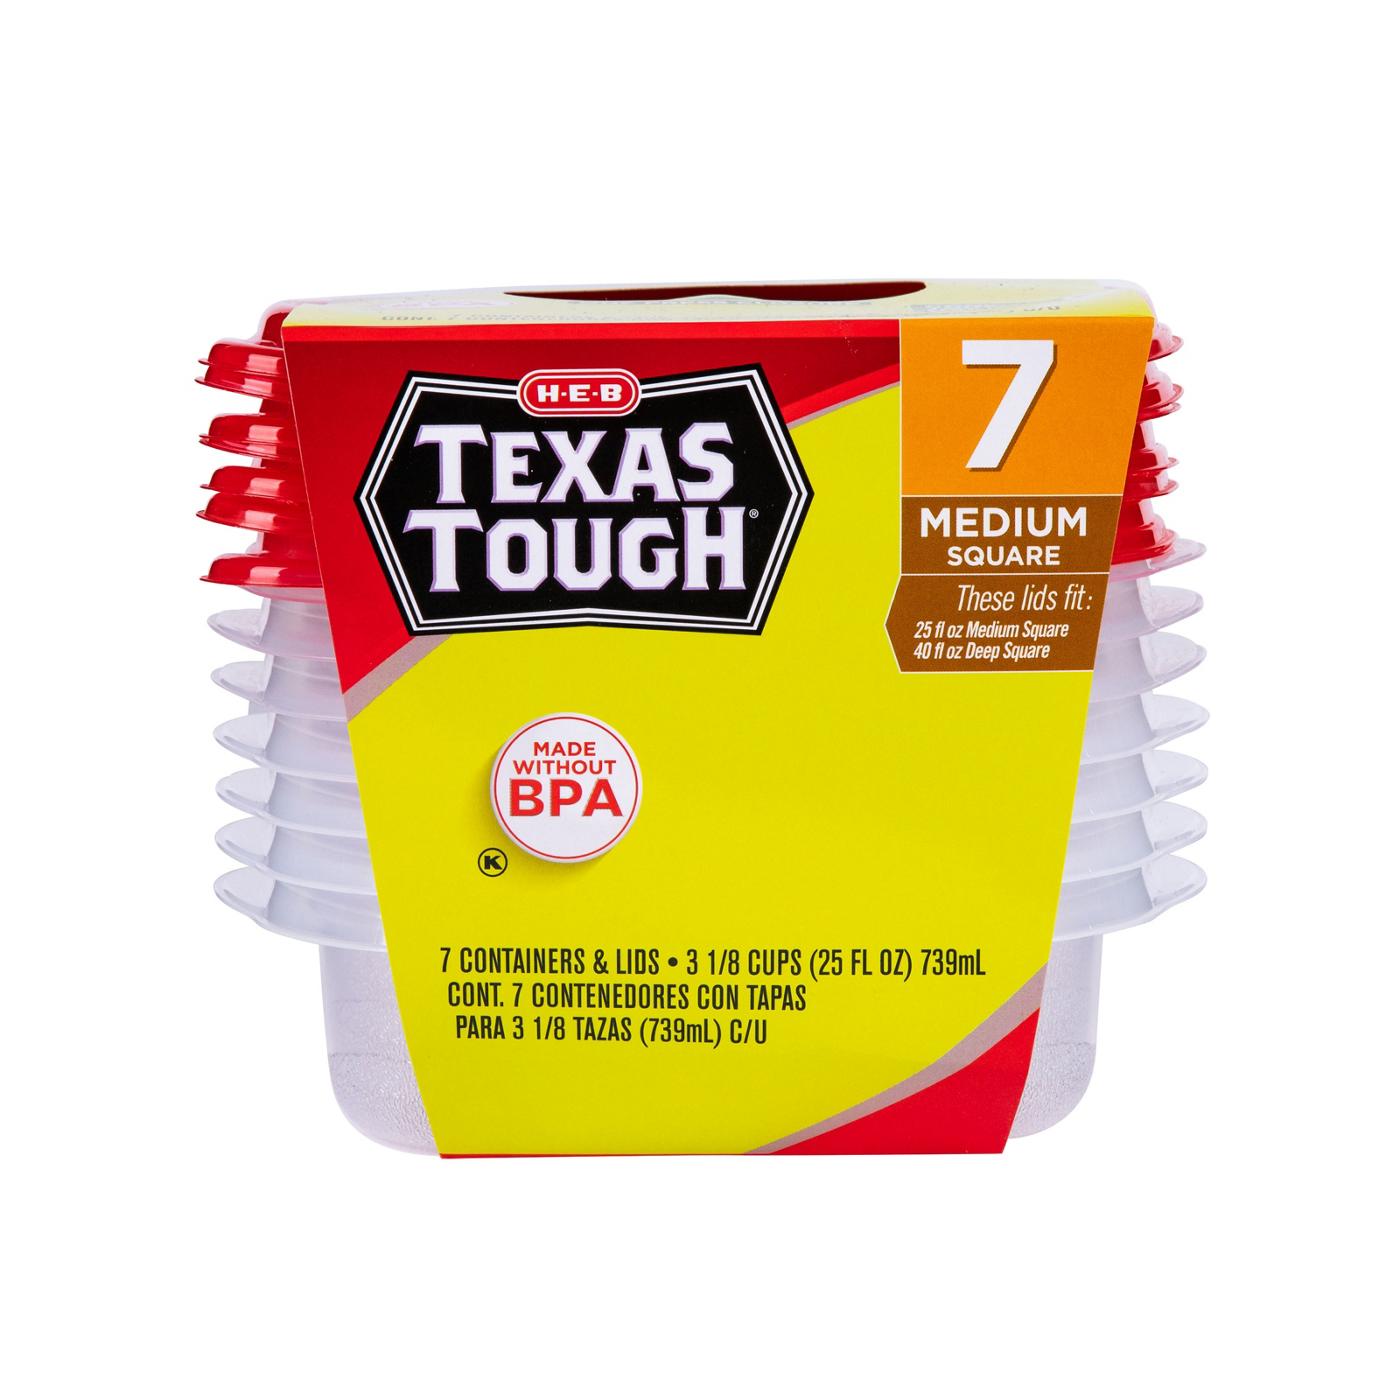 H-E-B Texas Tough Medium Square Reusable Containers with Lids; image 1 of 3